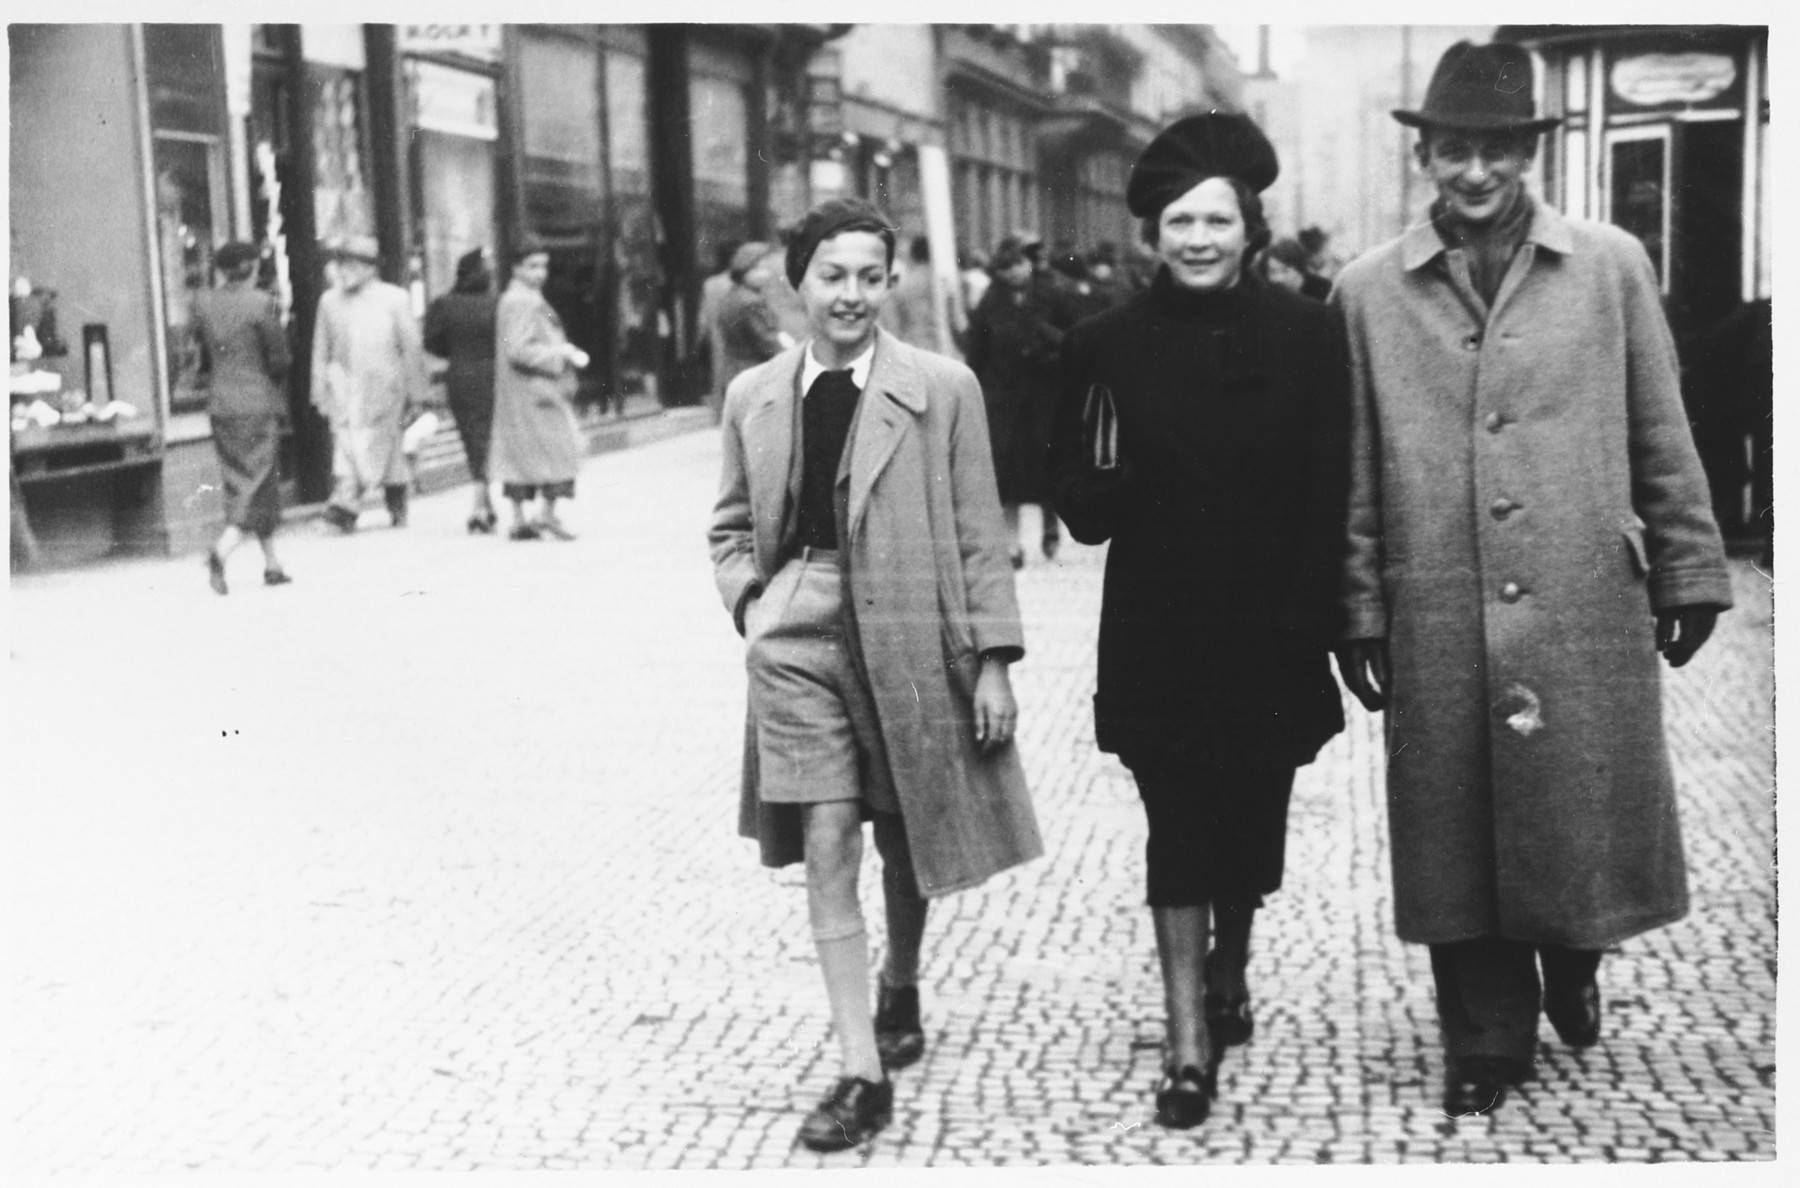 Austrian Jewish refugees walk along a street in Prague.

Pictured from left to right are Alfred and Trimette Langer.  The man on the right is unidentified.